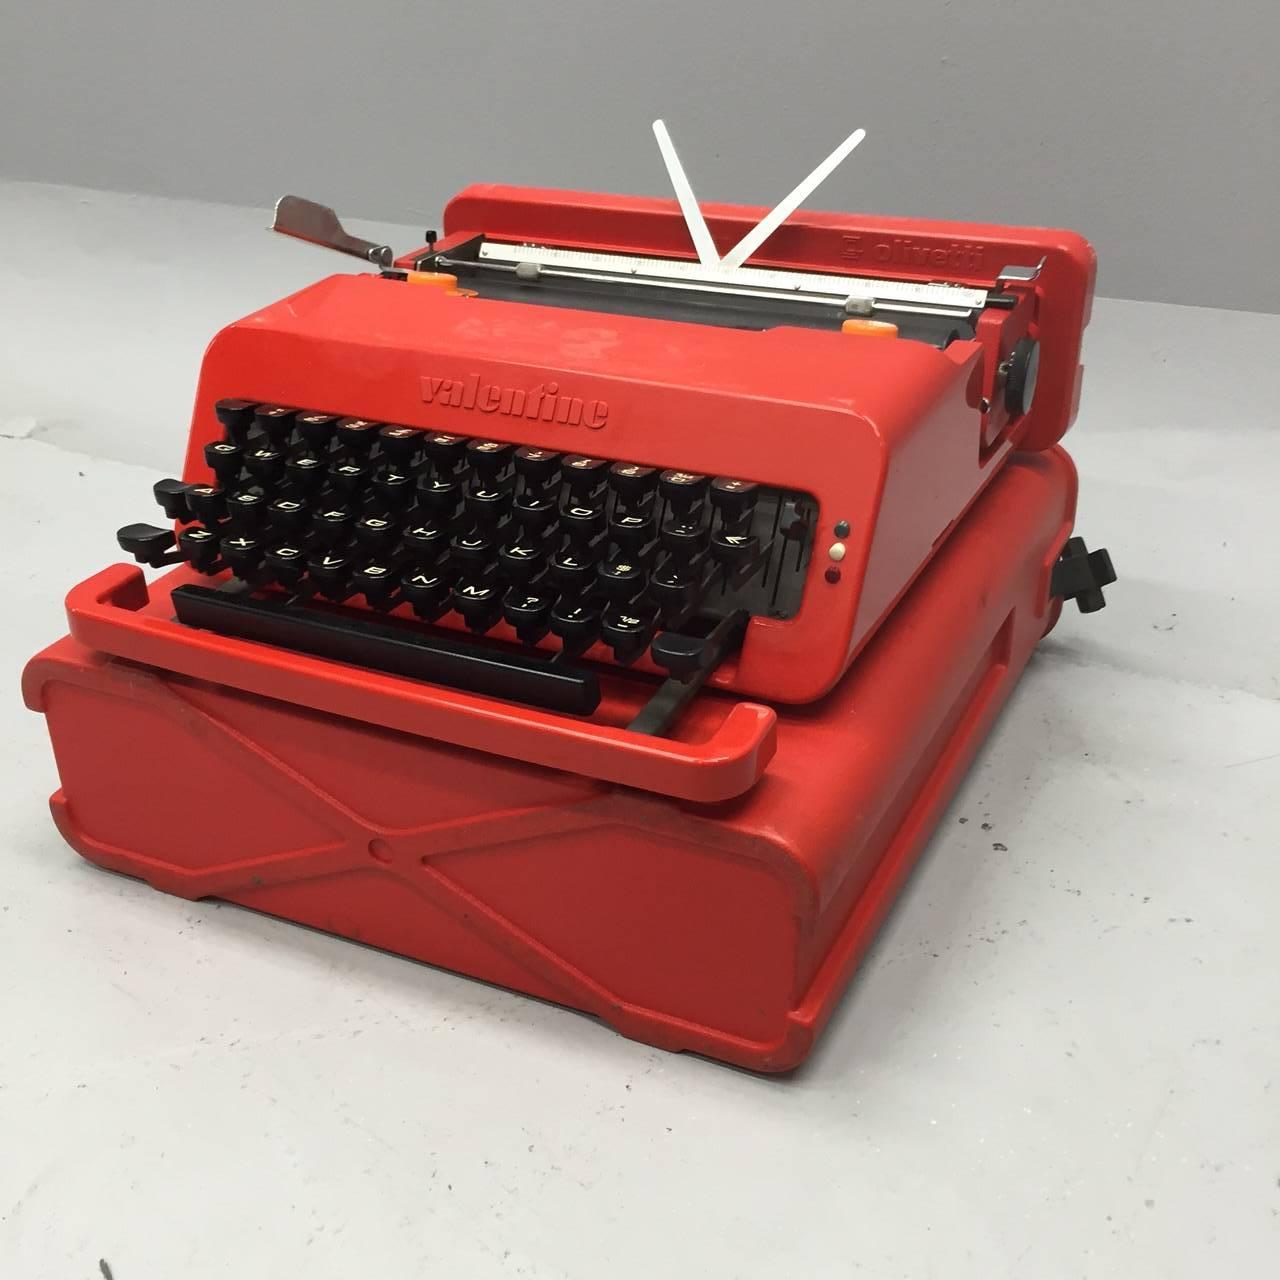 This is the iMac of it's day: the bright red Olivetti Valentine typewriter.
 
Designed by Ettore Sottsass and Perry King, the typewriter is housed in the permanent collection of the MoMa as an excellent example of Pop art. It is one of the rare